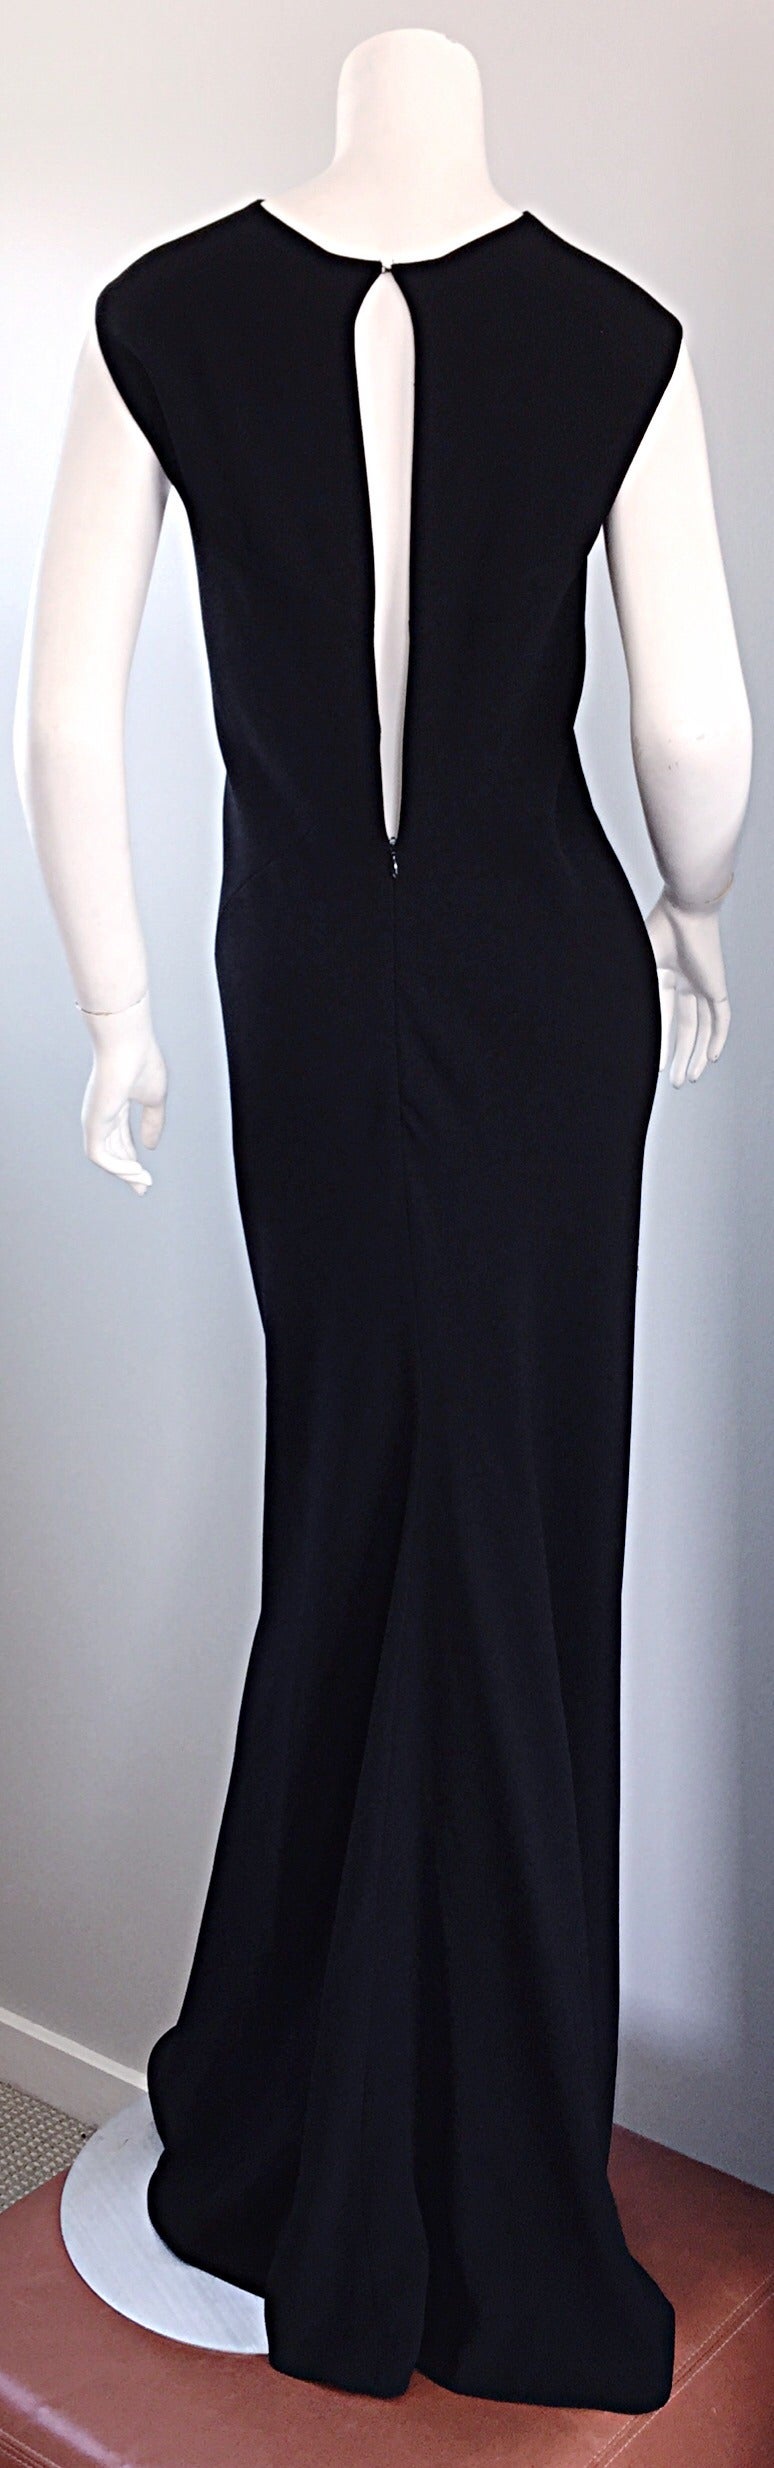 Stunning 1990s vintage Jean Paul Gaultier black gown! The lines, and cut on this beauty are just simply breathtaking! Who knew that a black gown could be made so beautifully? GAULTIER! Flattering sleeve cut, with a seductive, yet elegant open back.